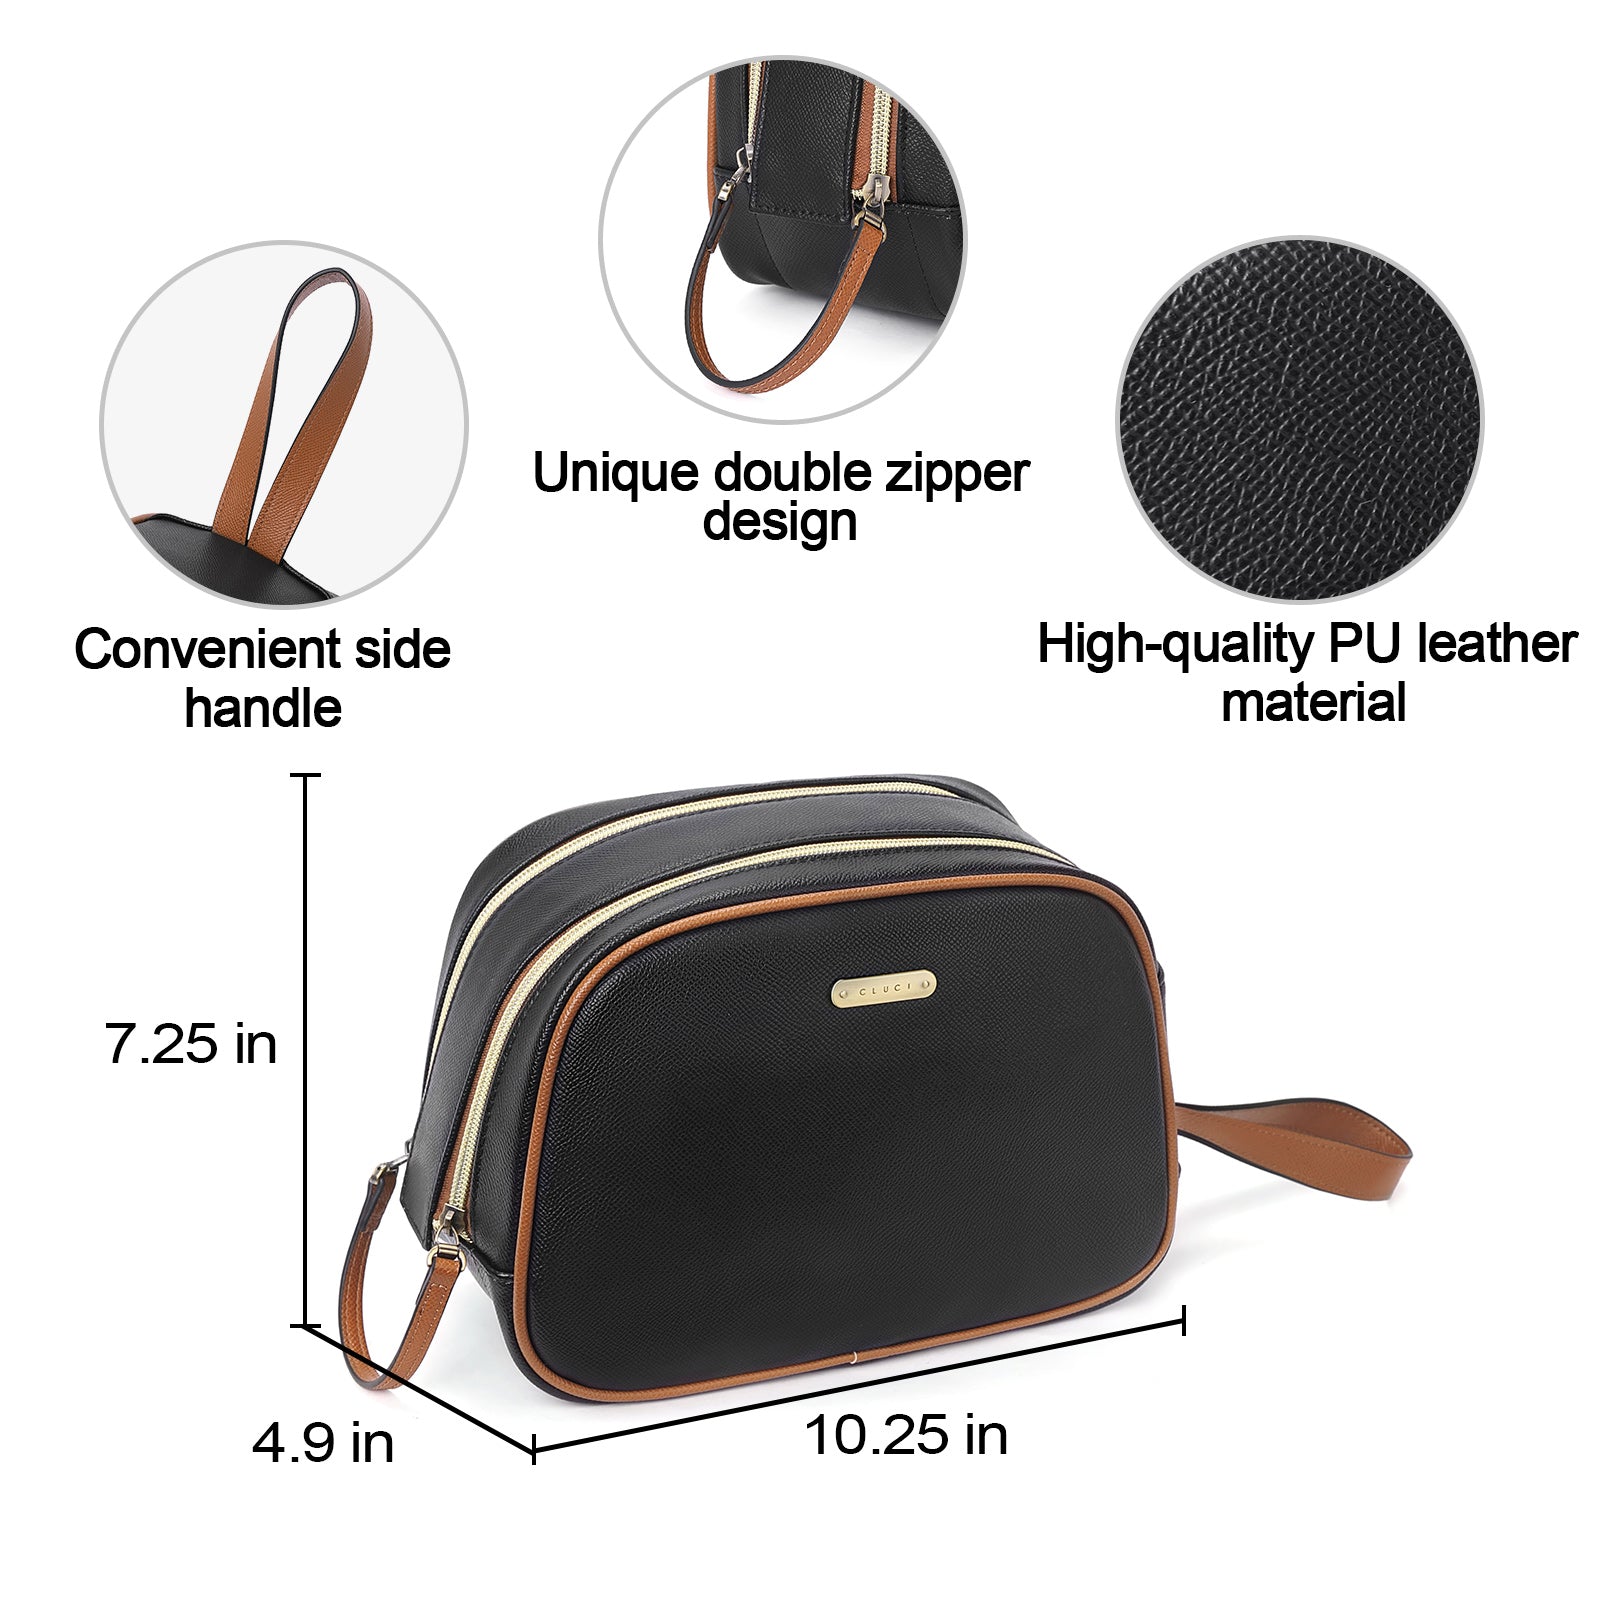 CLUCI Toiletry Bag for women / men Leather Travel Bag Water-resistant